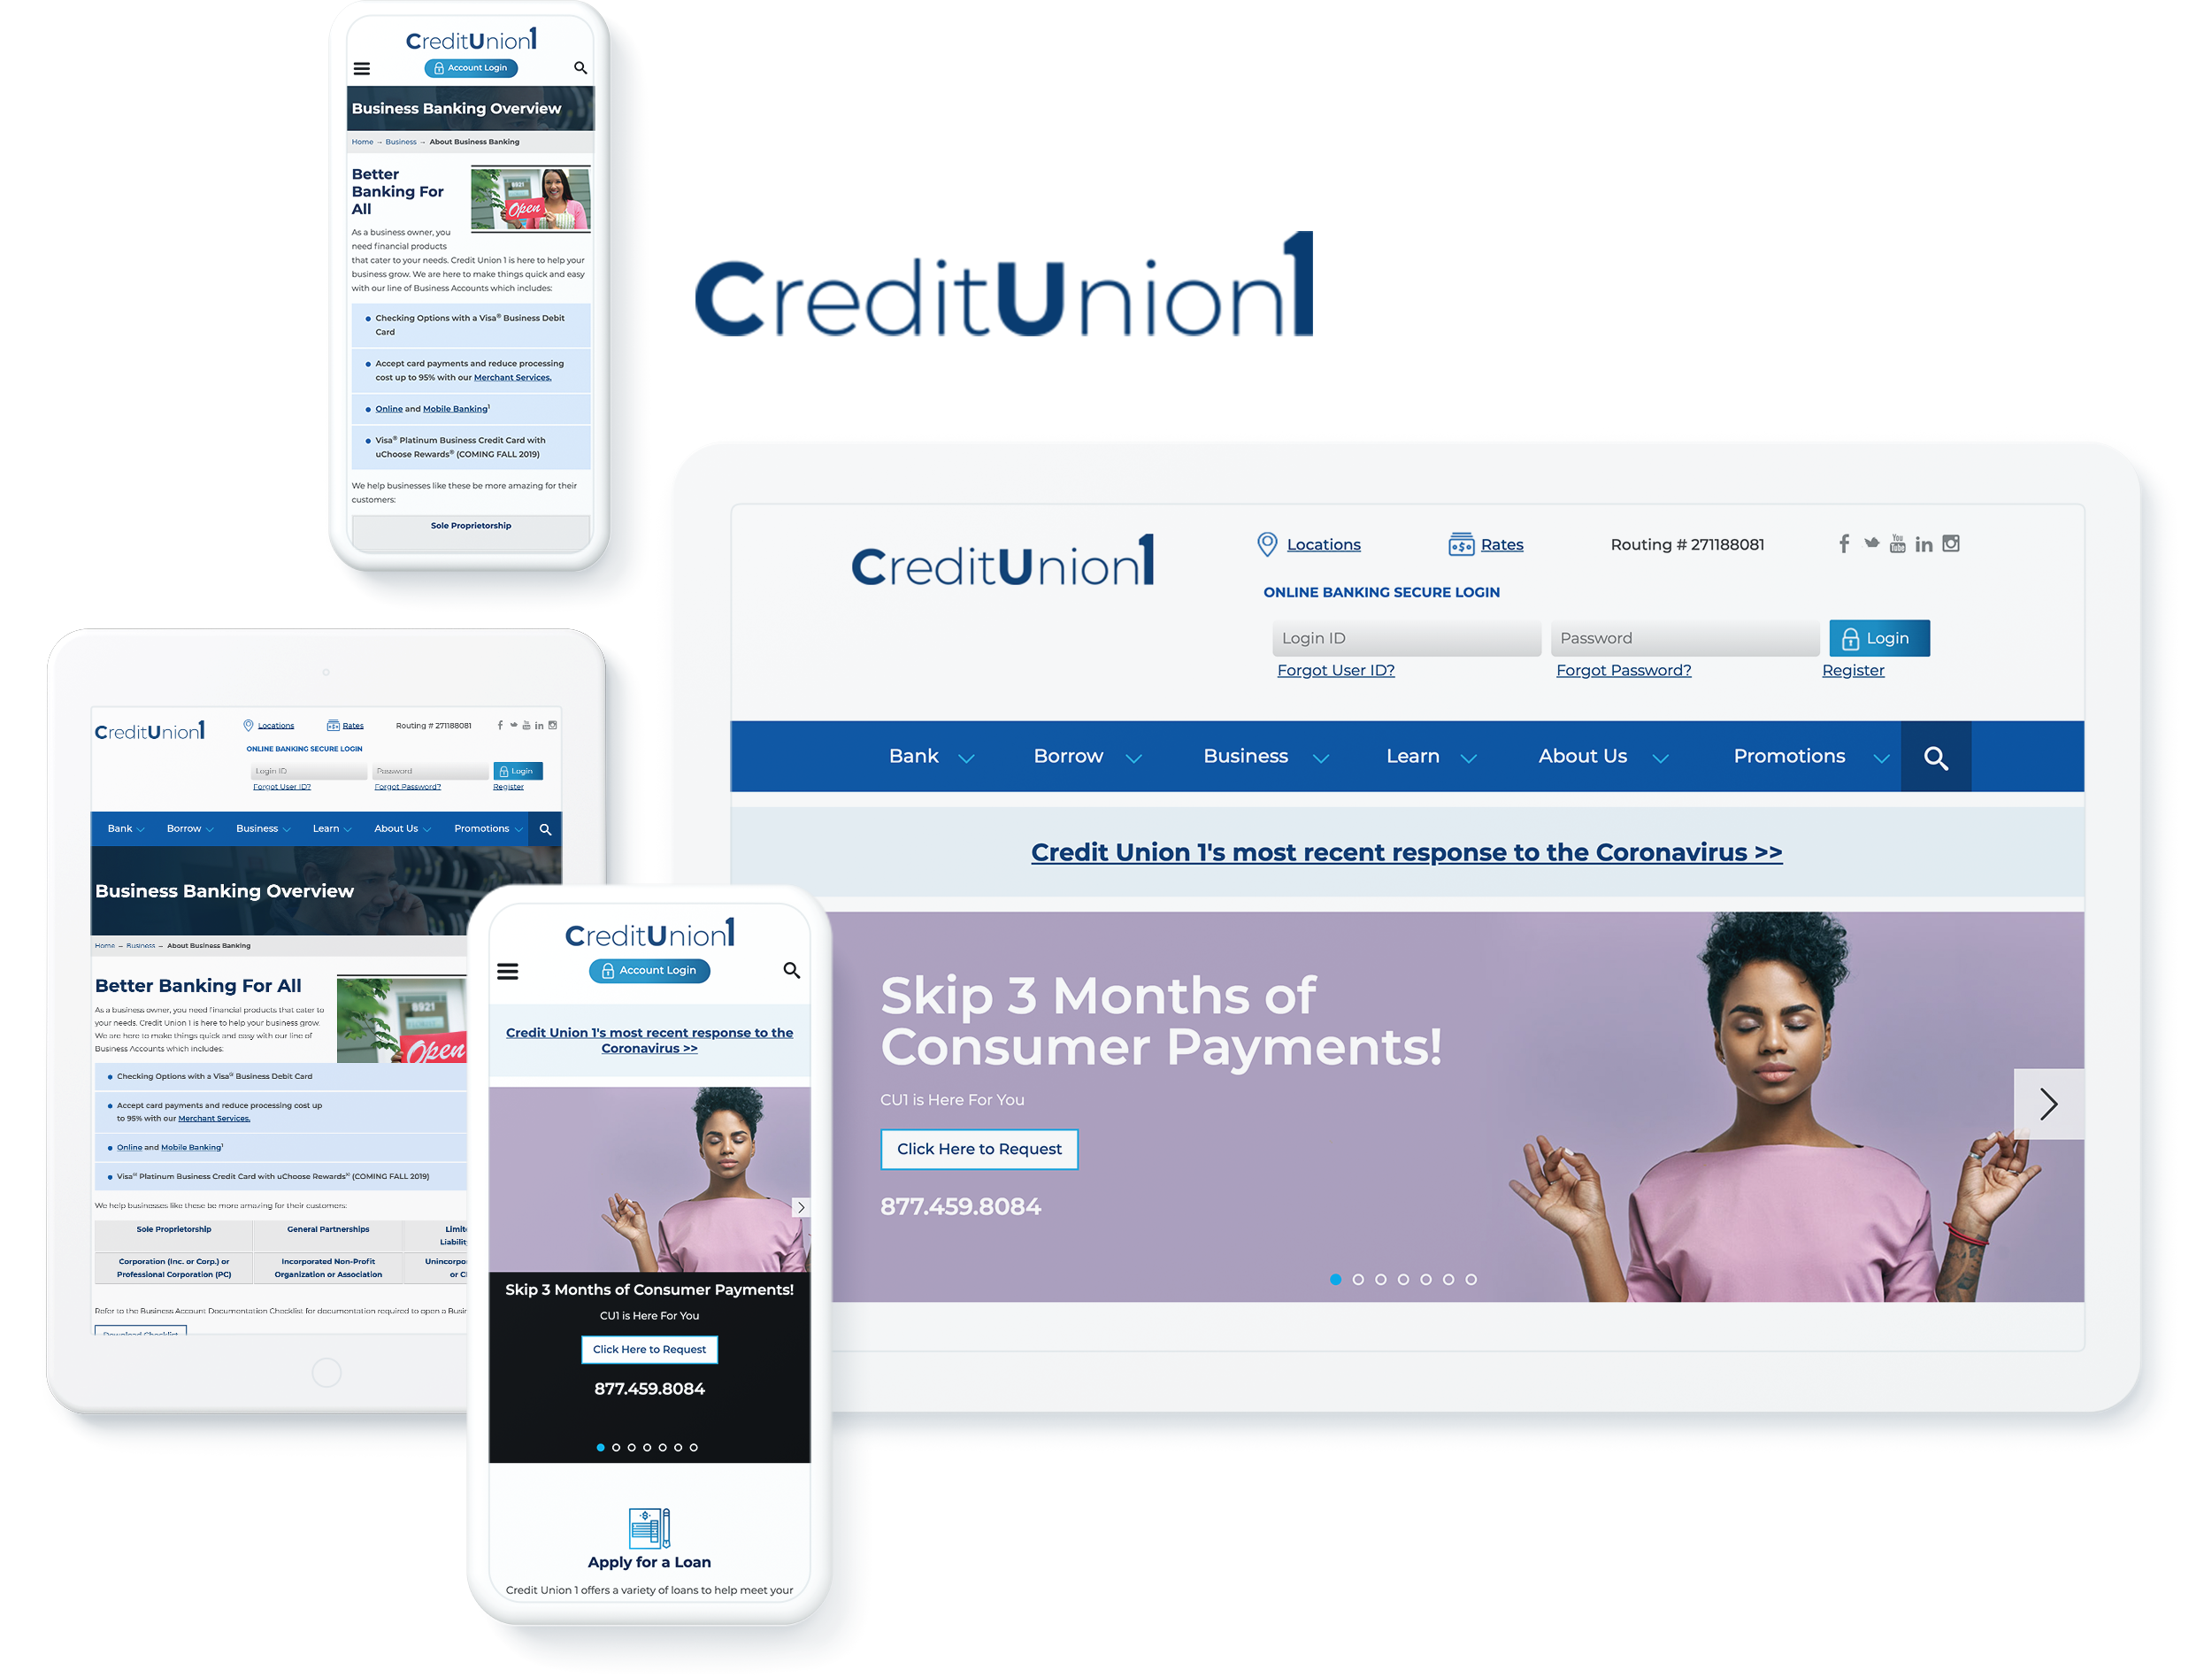 consumers credit union internal phone numbers illinois